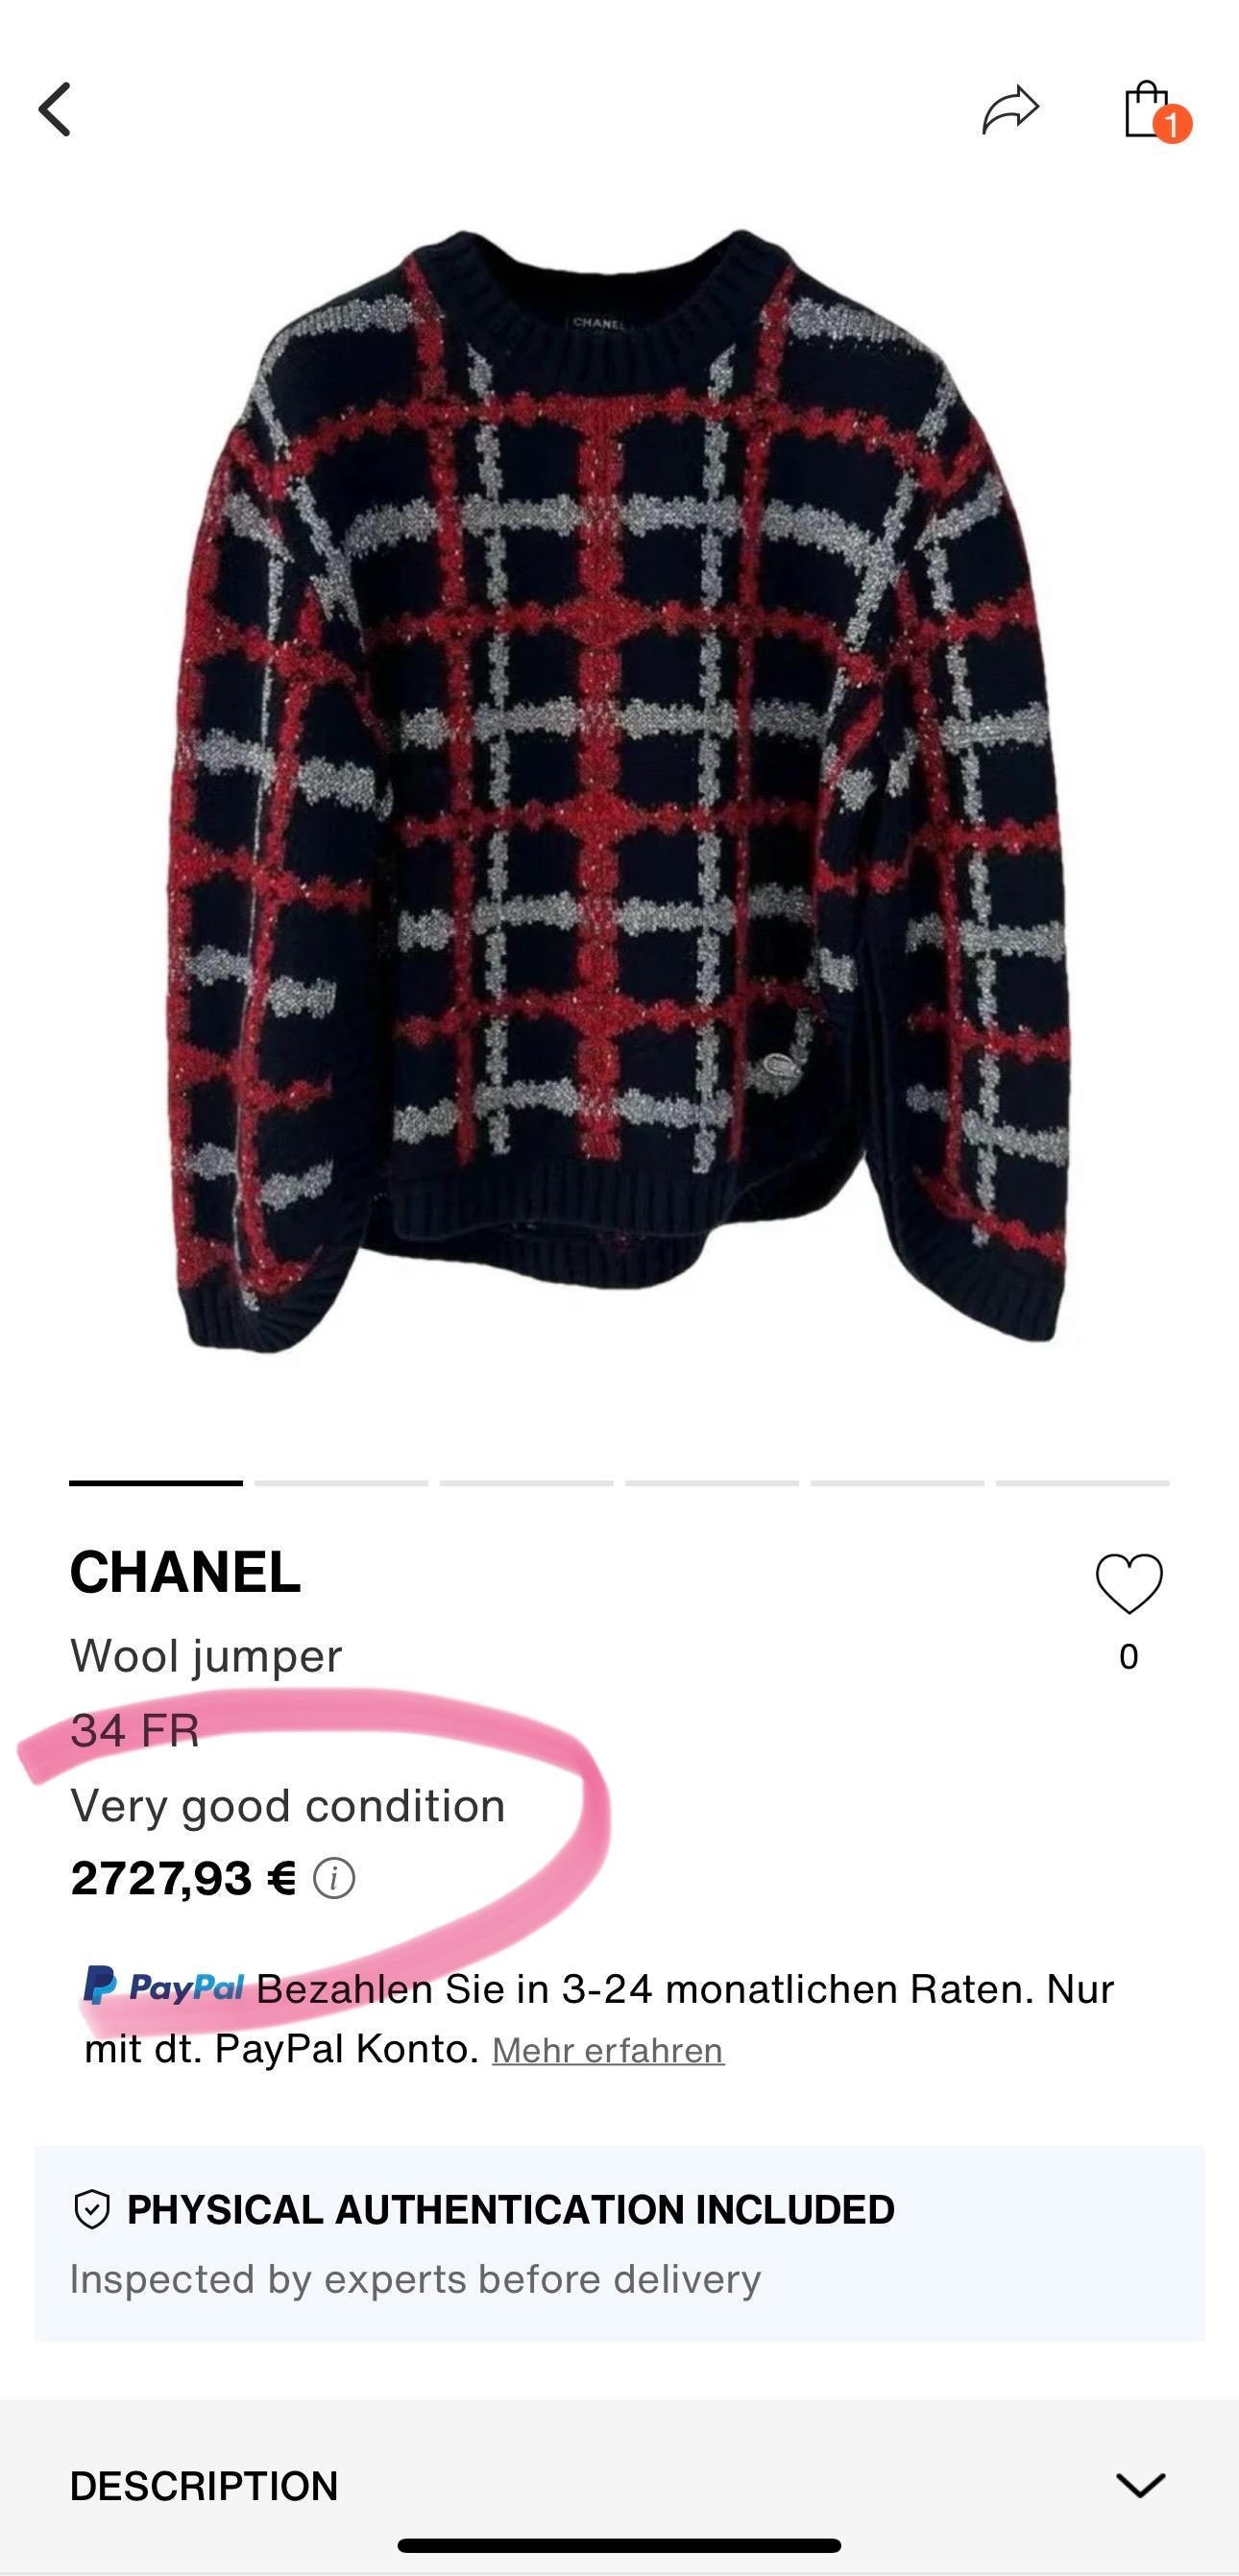 Charming and comfy Chanel wool and cashmere jumper from AIRPORT Collection by Karl Lagerfeld.
- CC logo charm at waist
Size mark 36 FR. Never worn.